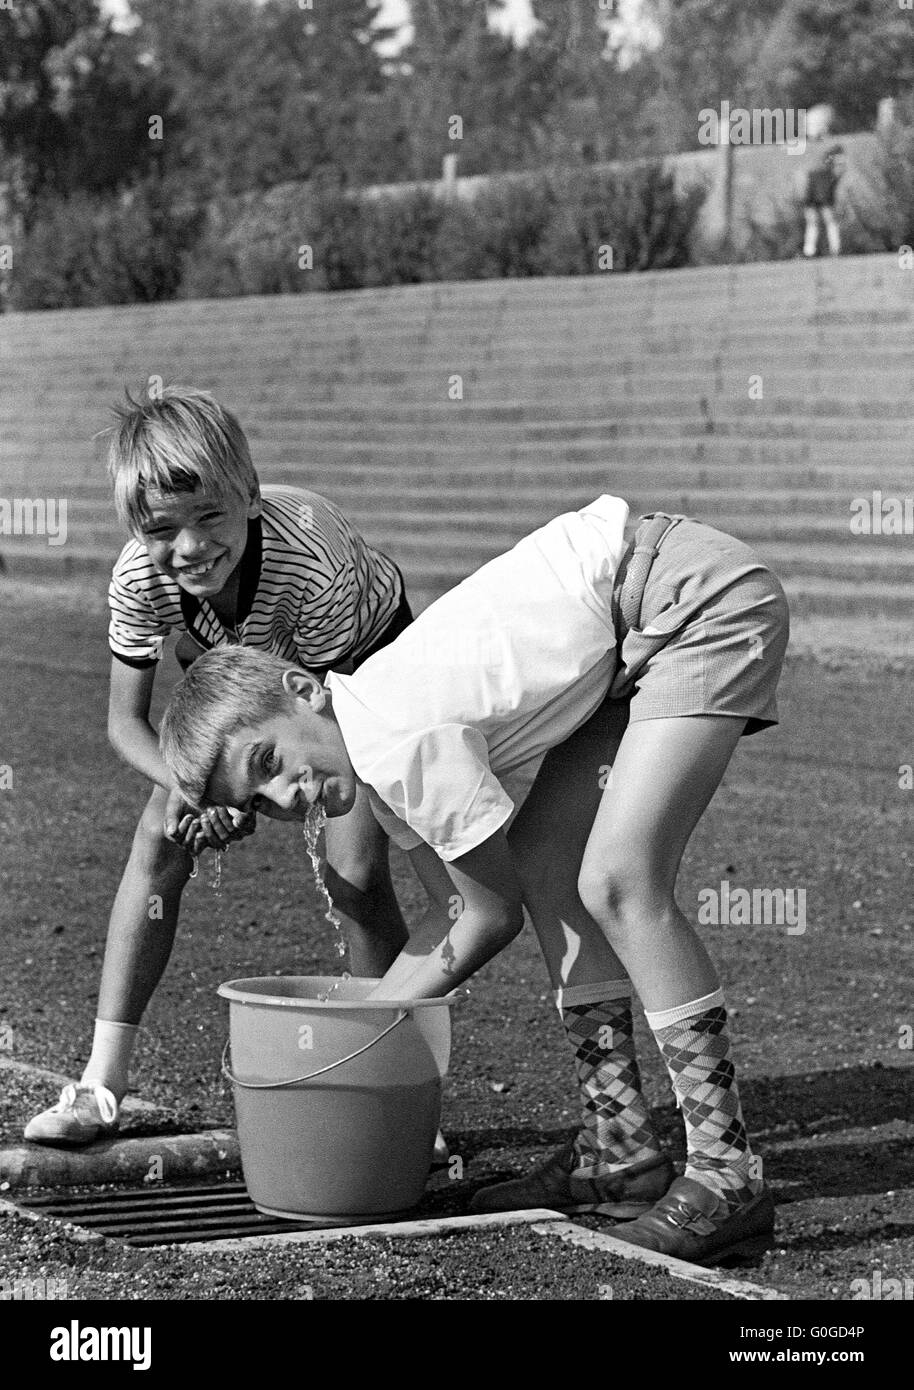 Sixties, black and white photo, people, summer heat, two boys 10 to 13 years refreshing at a water bucket, short trousers, knee-length socks Stock Photo